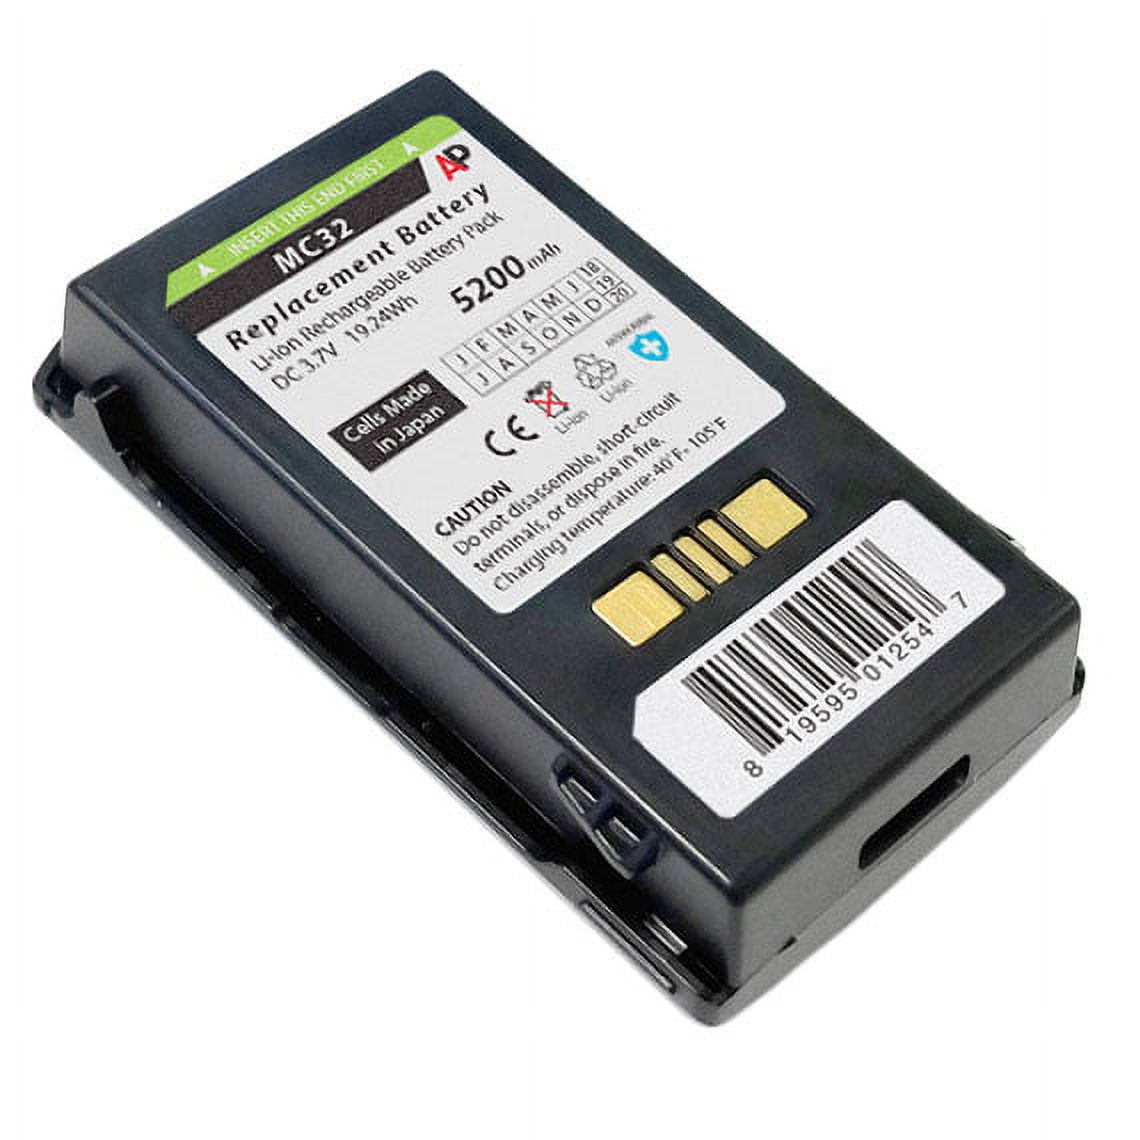 Extended Capacity Replacement Battery for Motorola MC3200 Scanner. 5200 mAh. - image 1 of 5